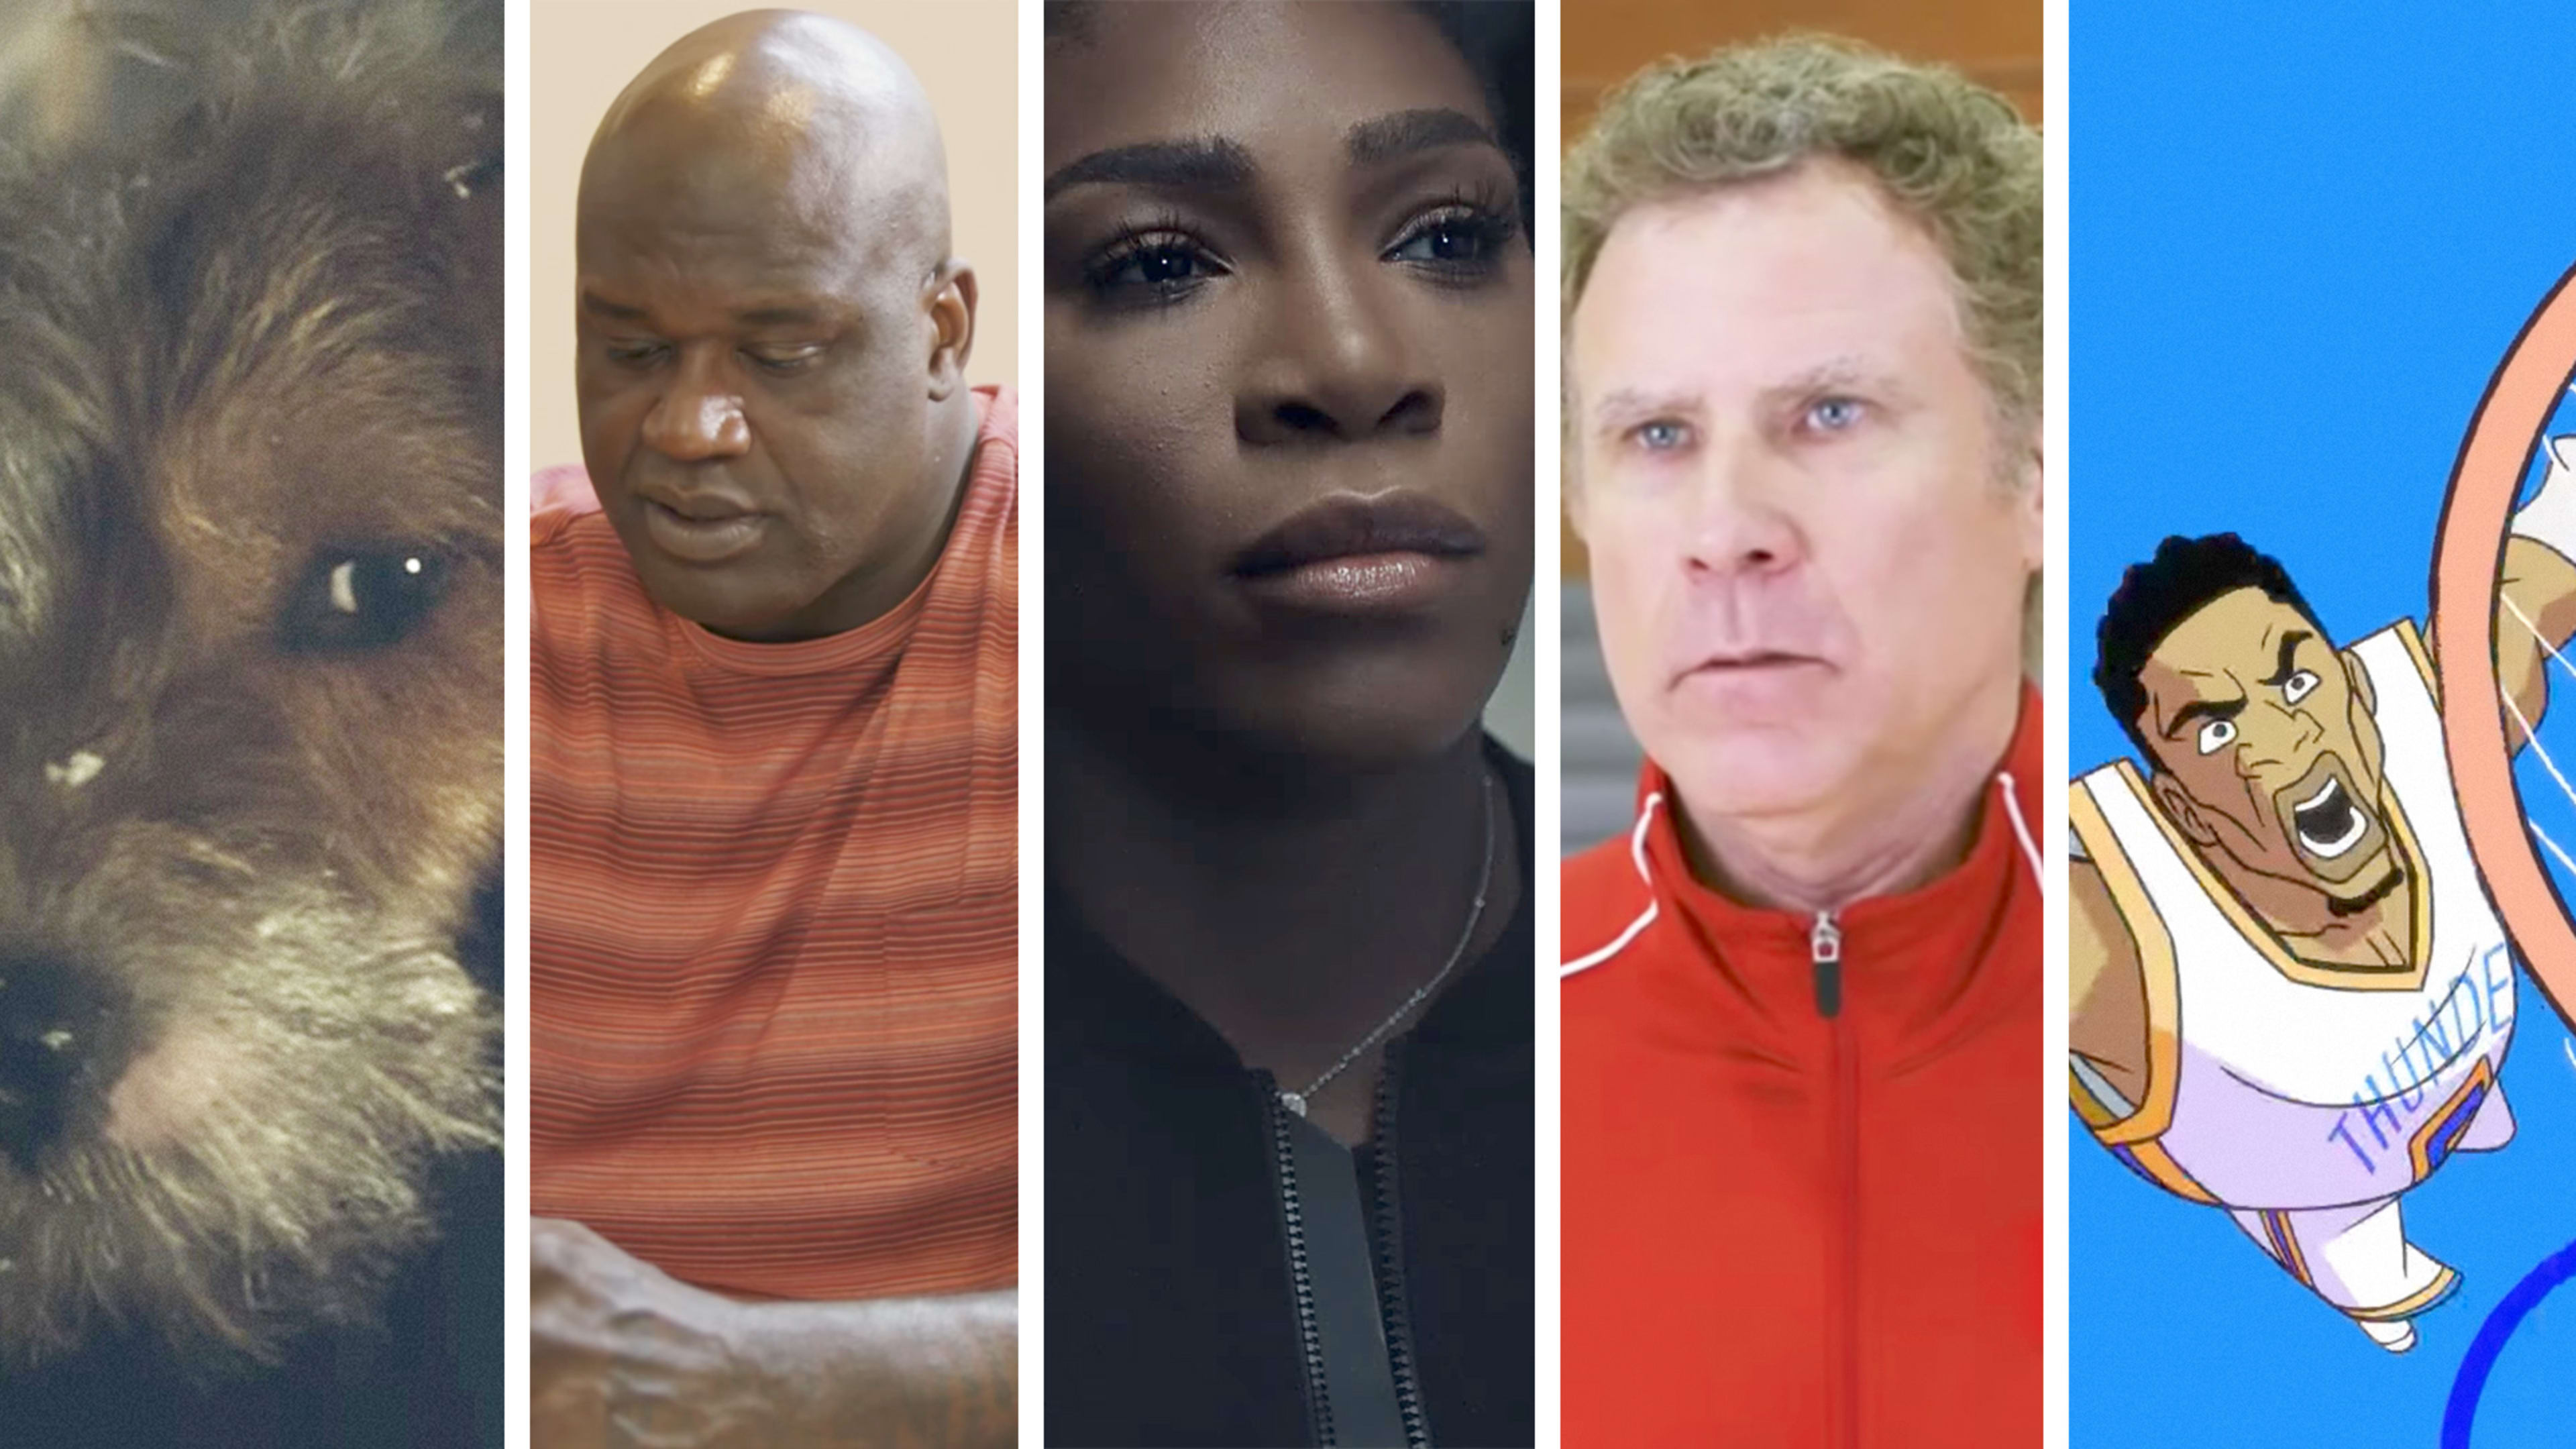 Drake And Will Ferrell’s NBA Shake, Twitter’s GOAT: The Top 5 Ads Of The Week